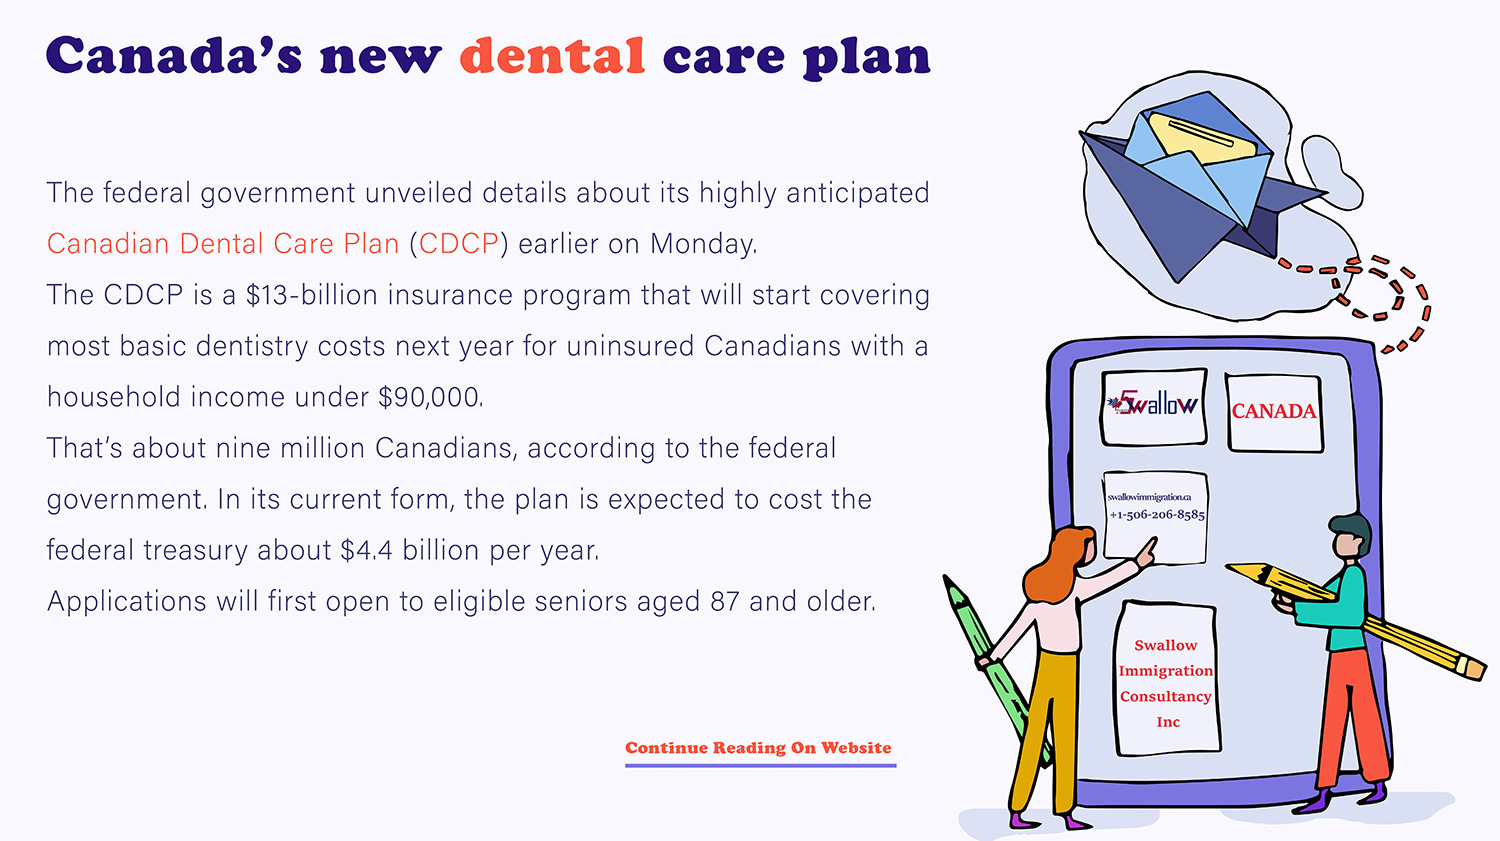 Canada’s new dental care plan